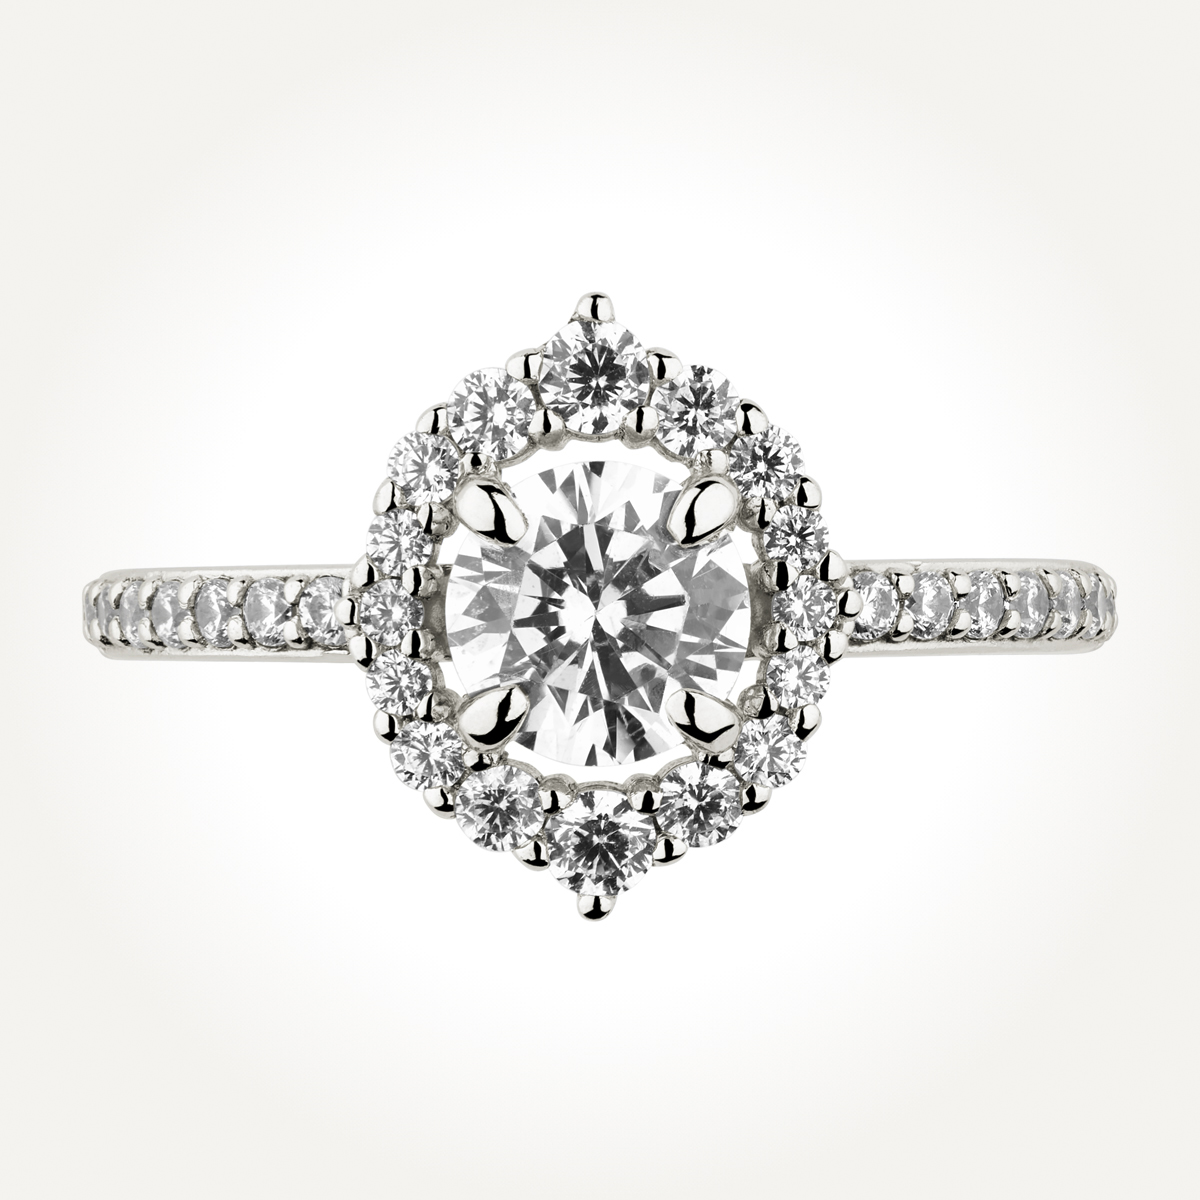 Pave Halo Engagement Ring with Open Bridge Design – bbr496-1